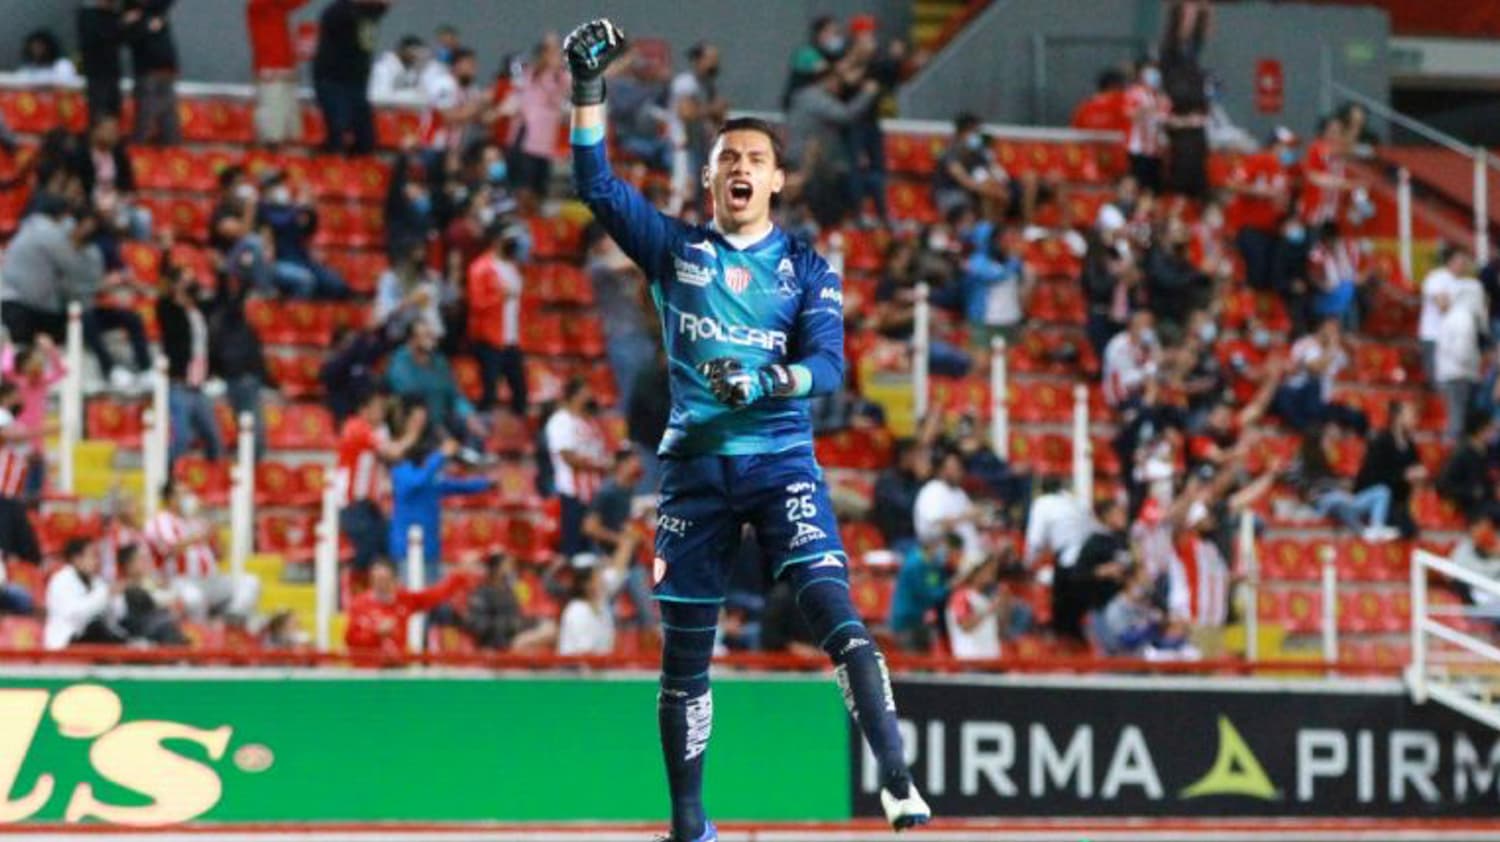 Necaxa vs Monterrey match analysis. The importance of body position for goalkeepers